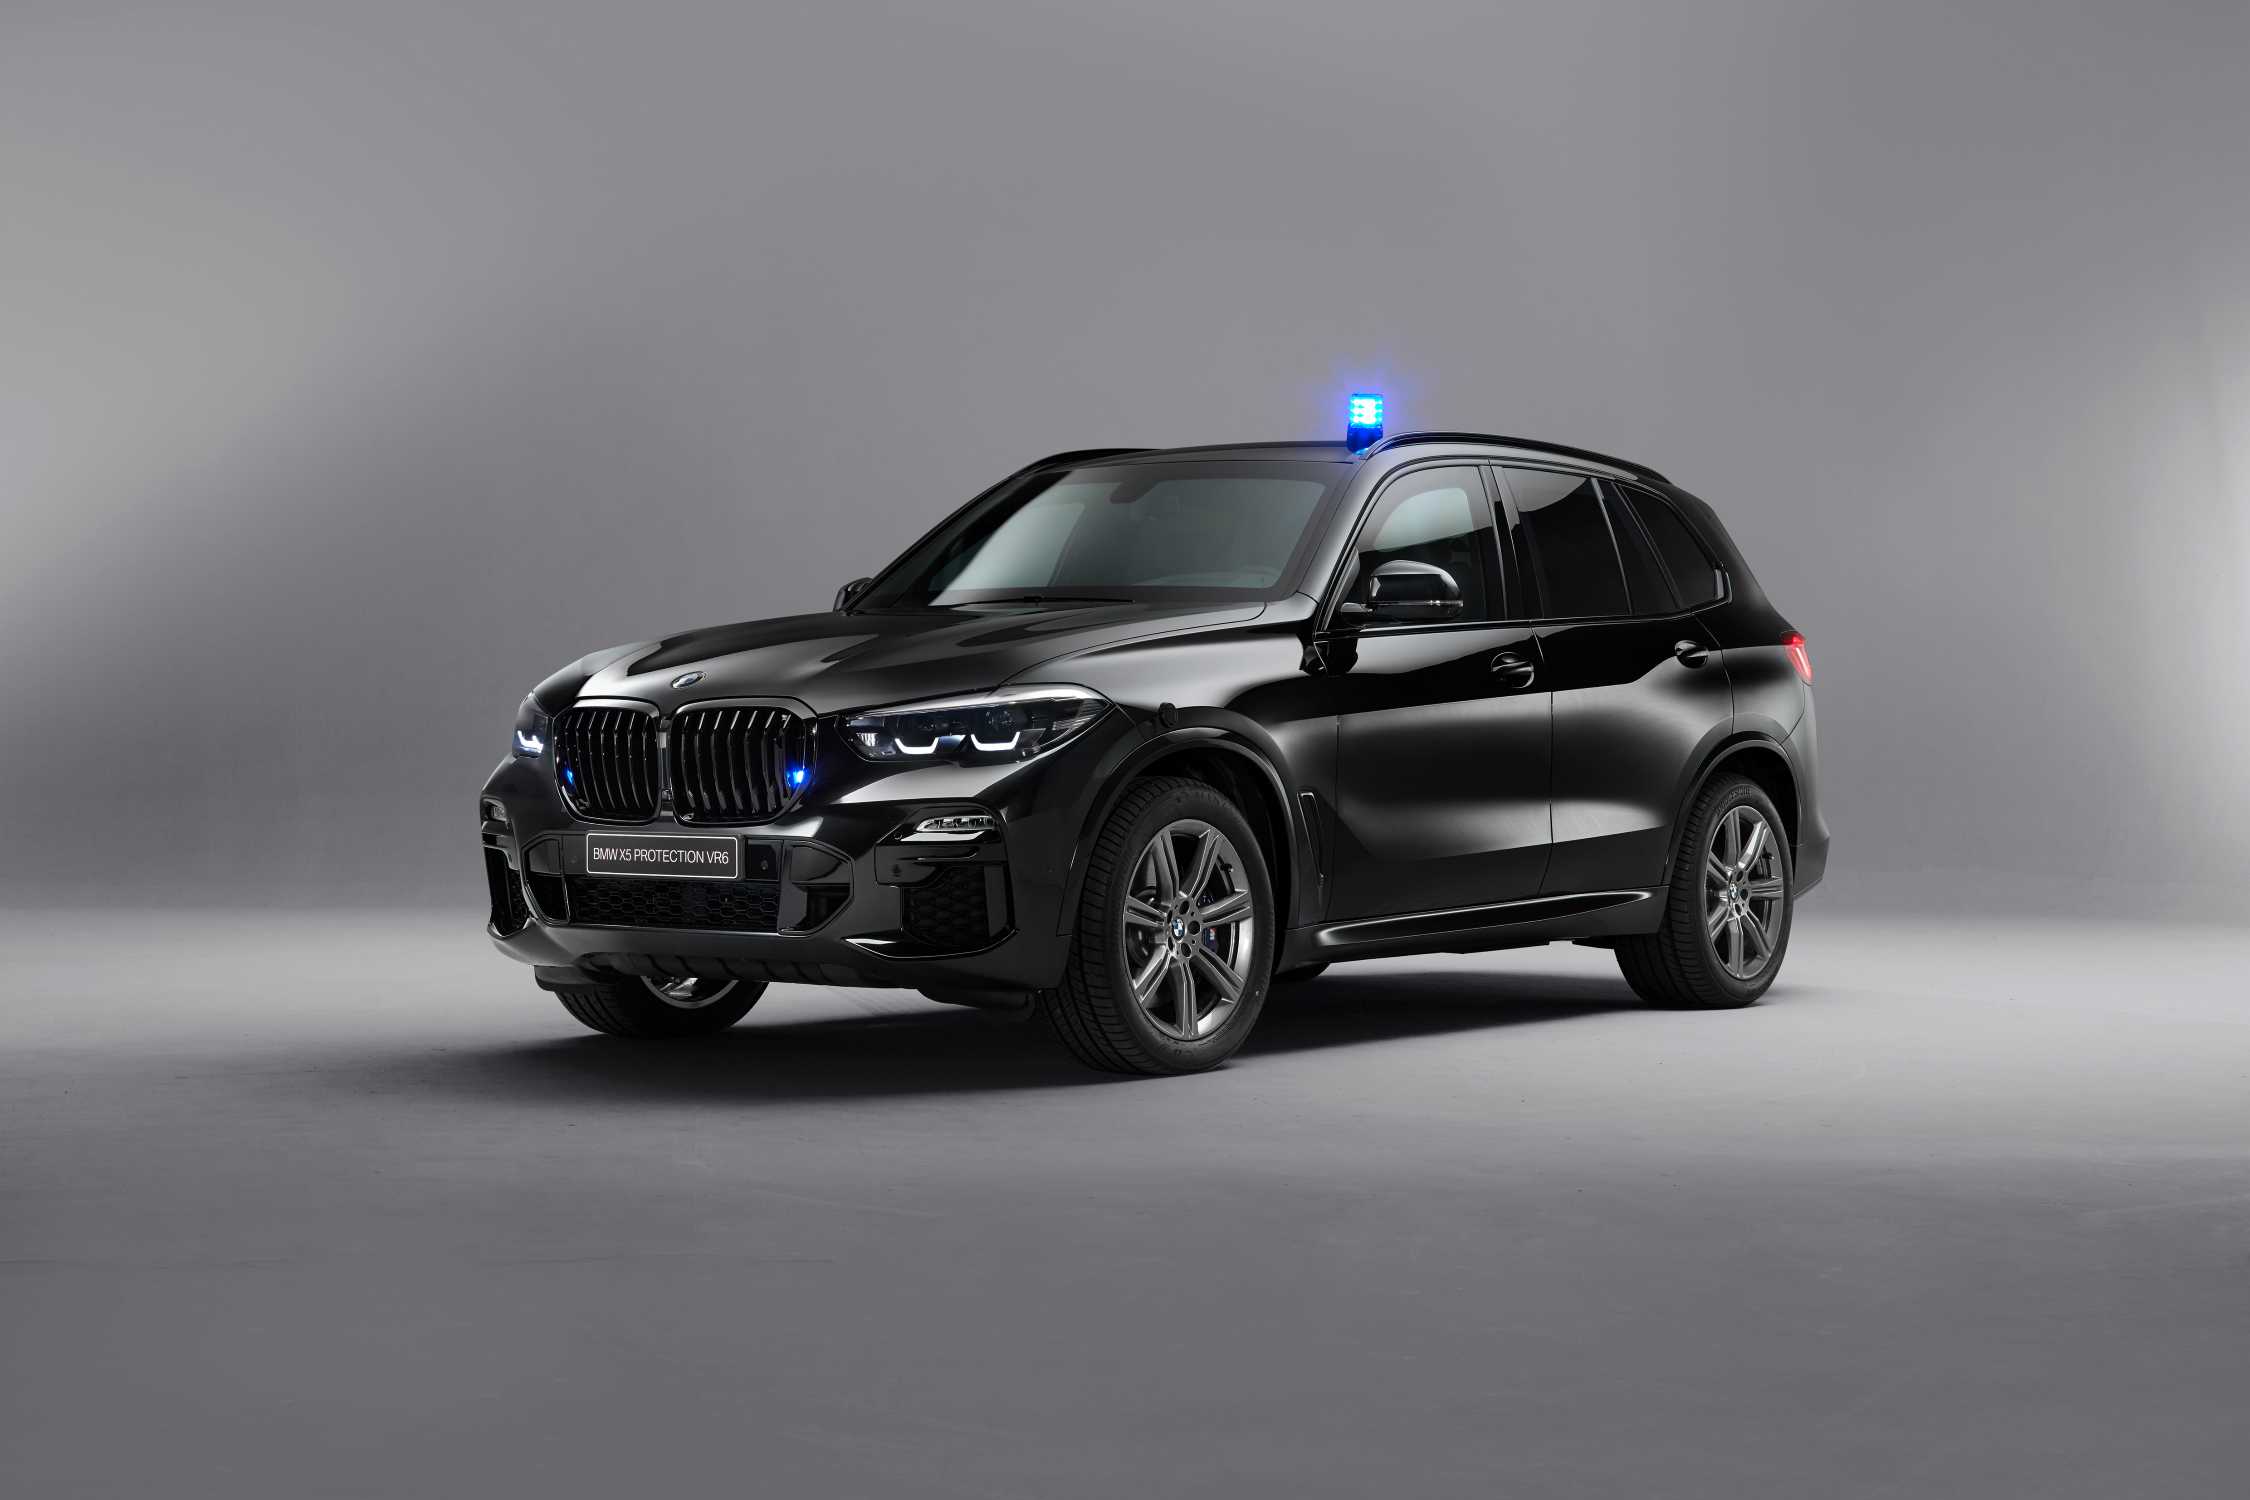 The new BMW X5 Protection VR6 - Studio shots (08/2019).